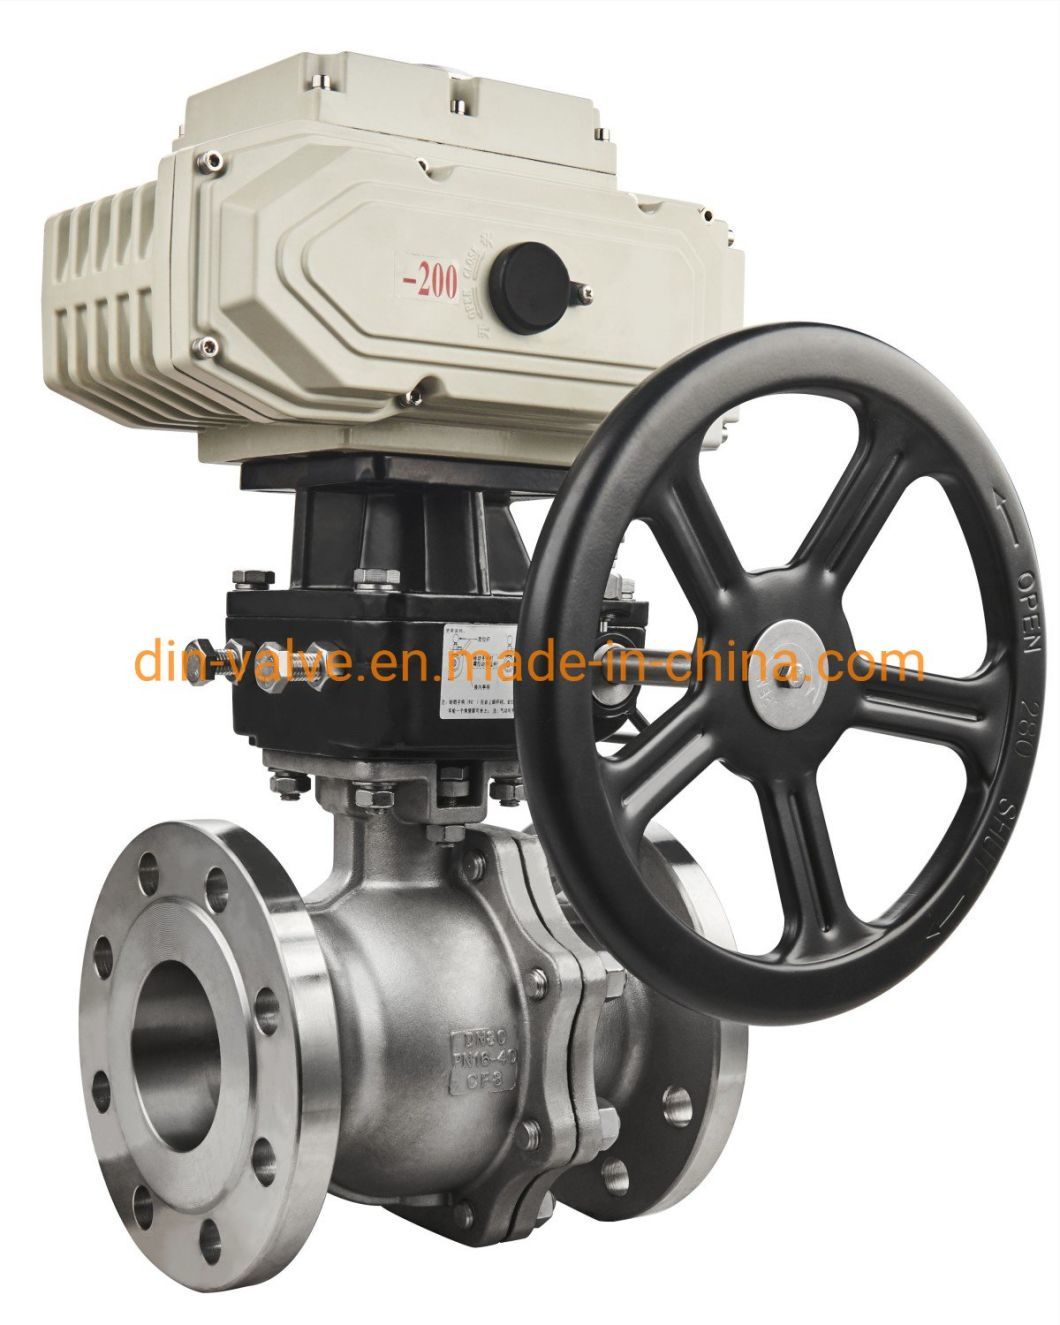 DIN Wcb/CF8/CF8m Stainless Steel Floating Flange Ball Valve with Actuator